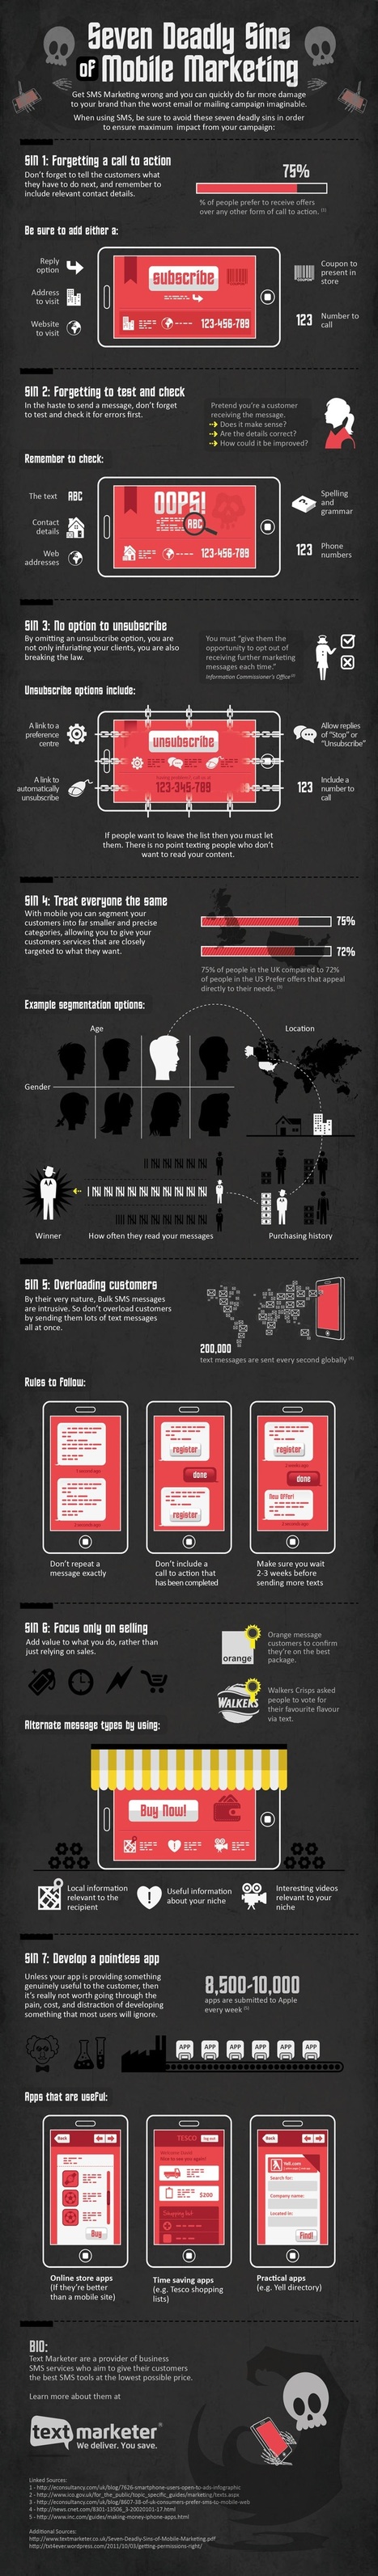 Seven Deadly Sins of Mobile Marketing [Infographic] - Profs | The MarTech Digest | Scoop.it